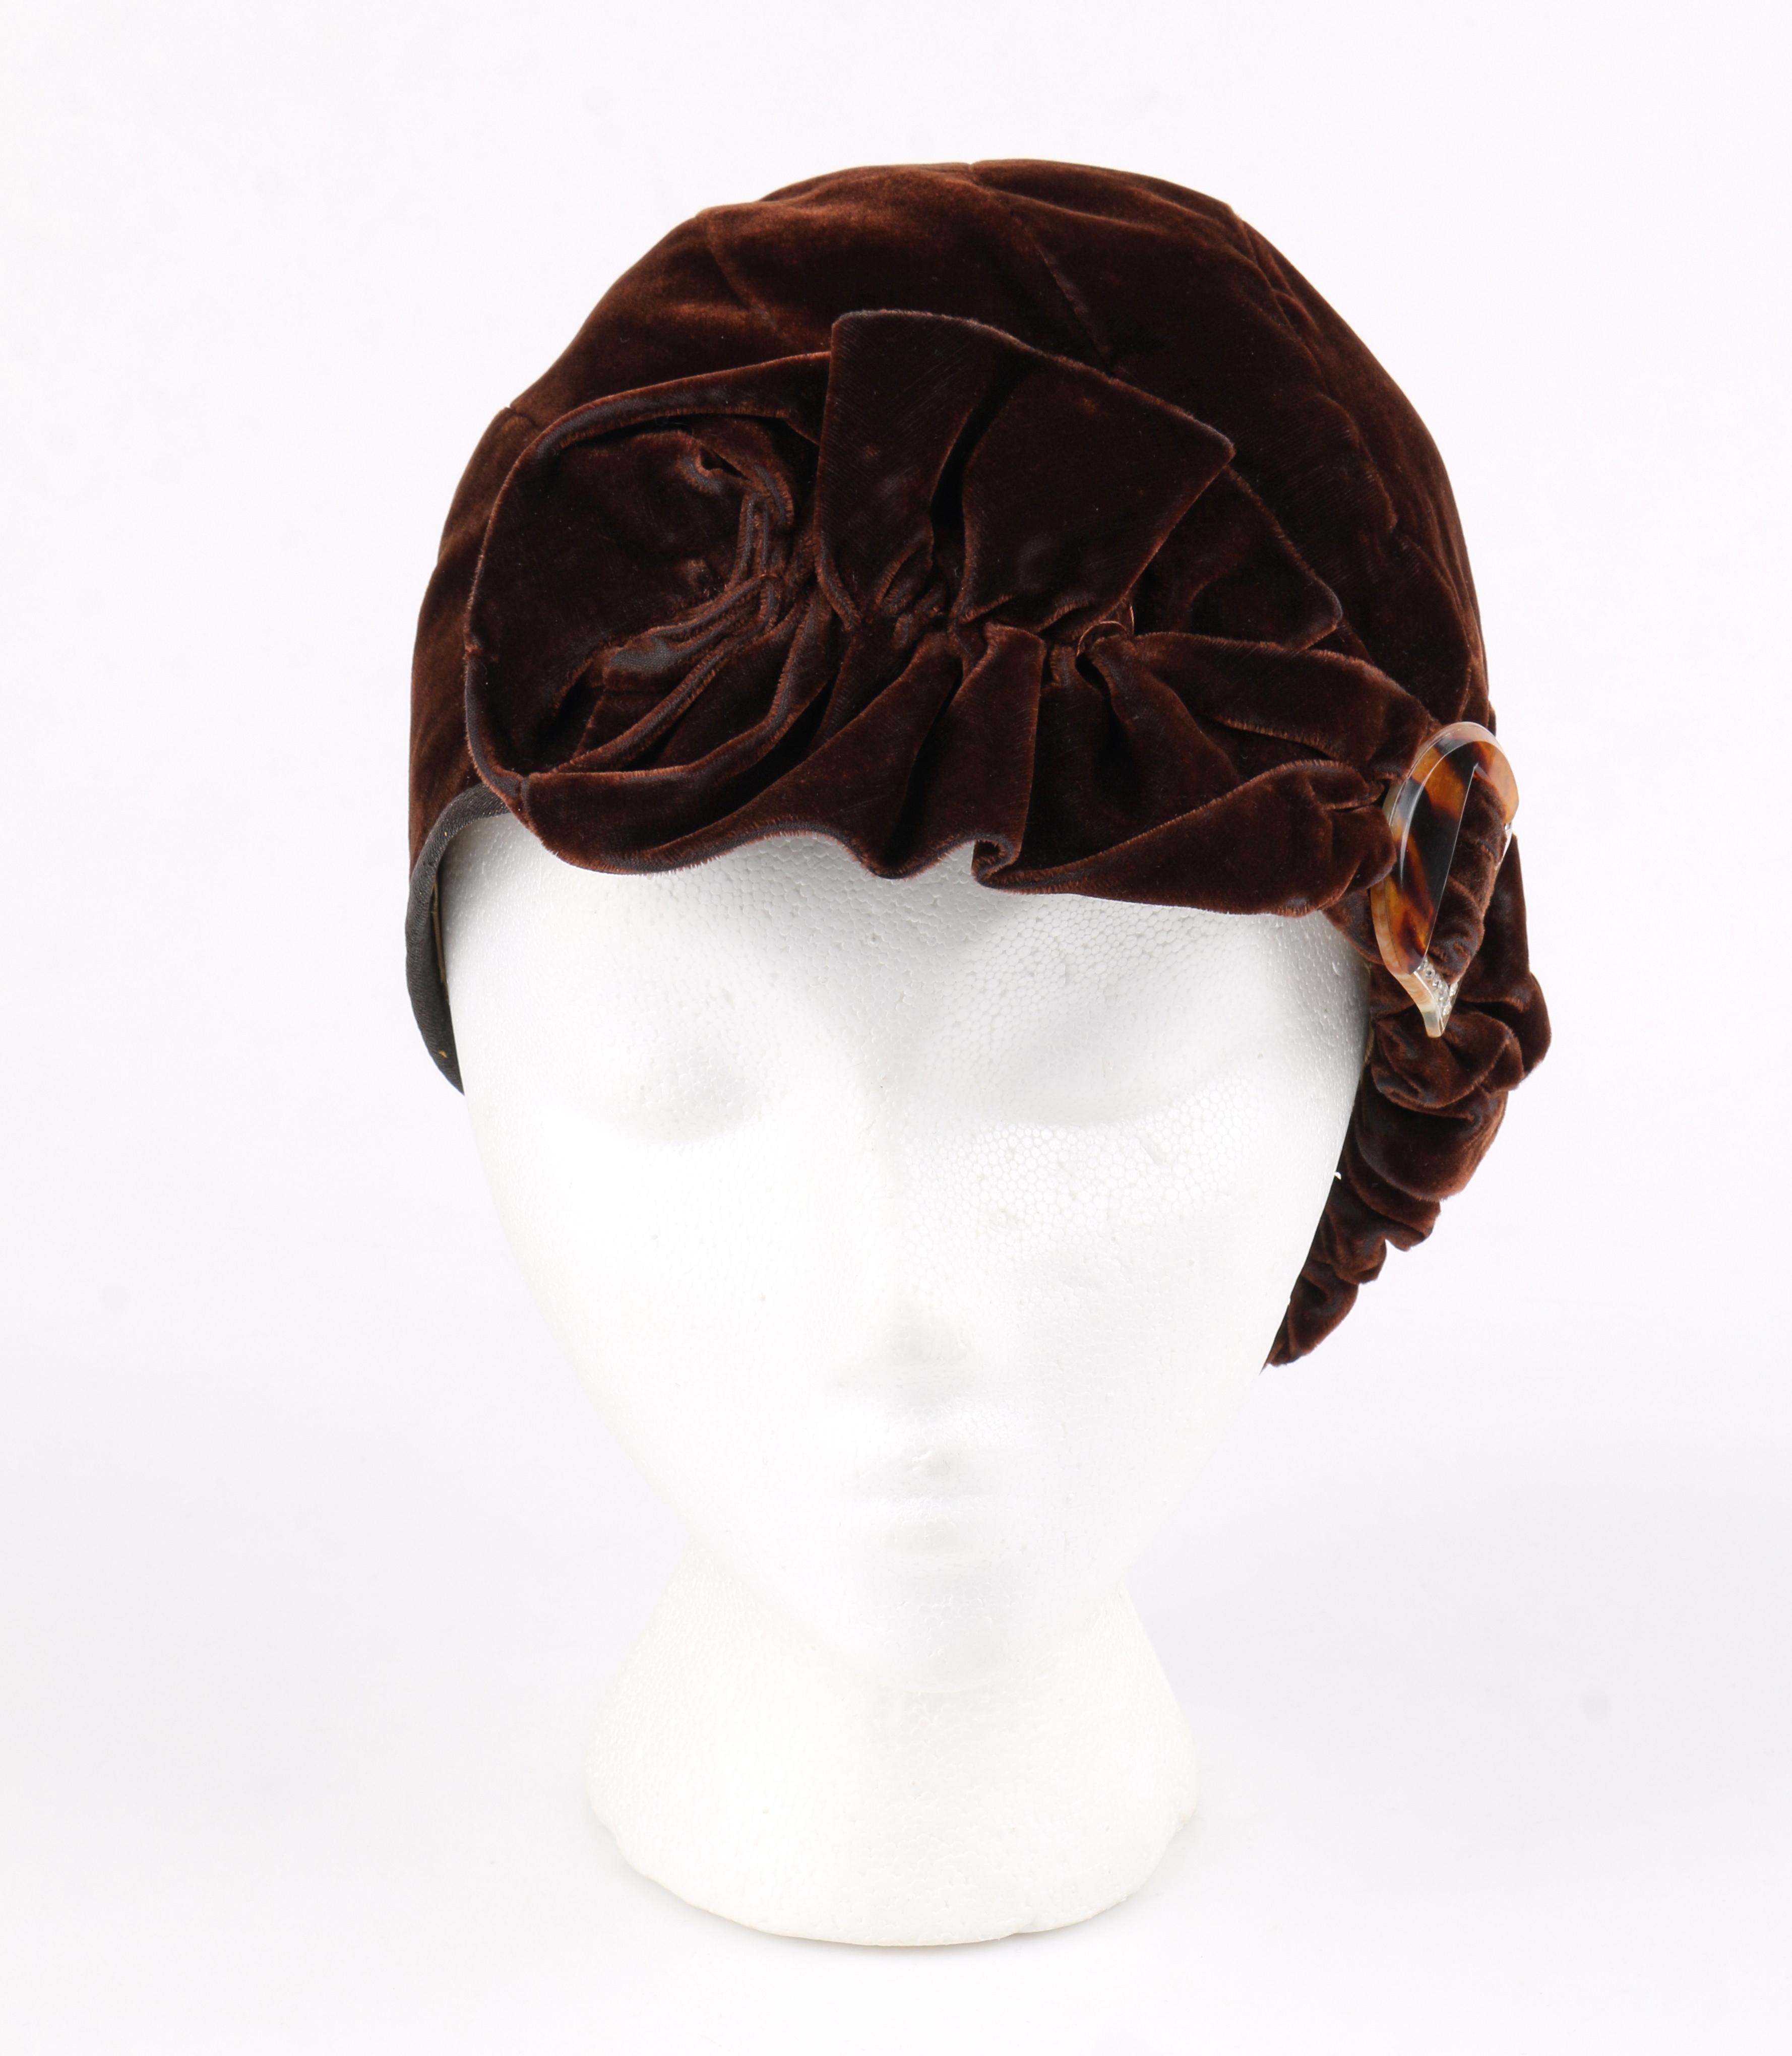 COUTURE c.1920’s Dark Brown Ruffle Tortoise Shell Crystal Deco Embellishment Velvet Cloche Hat
 
Circa: 1920’s 
Style: Hat
Color(s): Brown
Lined: Yes 
Unmarked Fabric Content (feel of): velvet (exterior); silk (lining)
Additional Details /